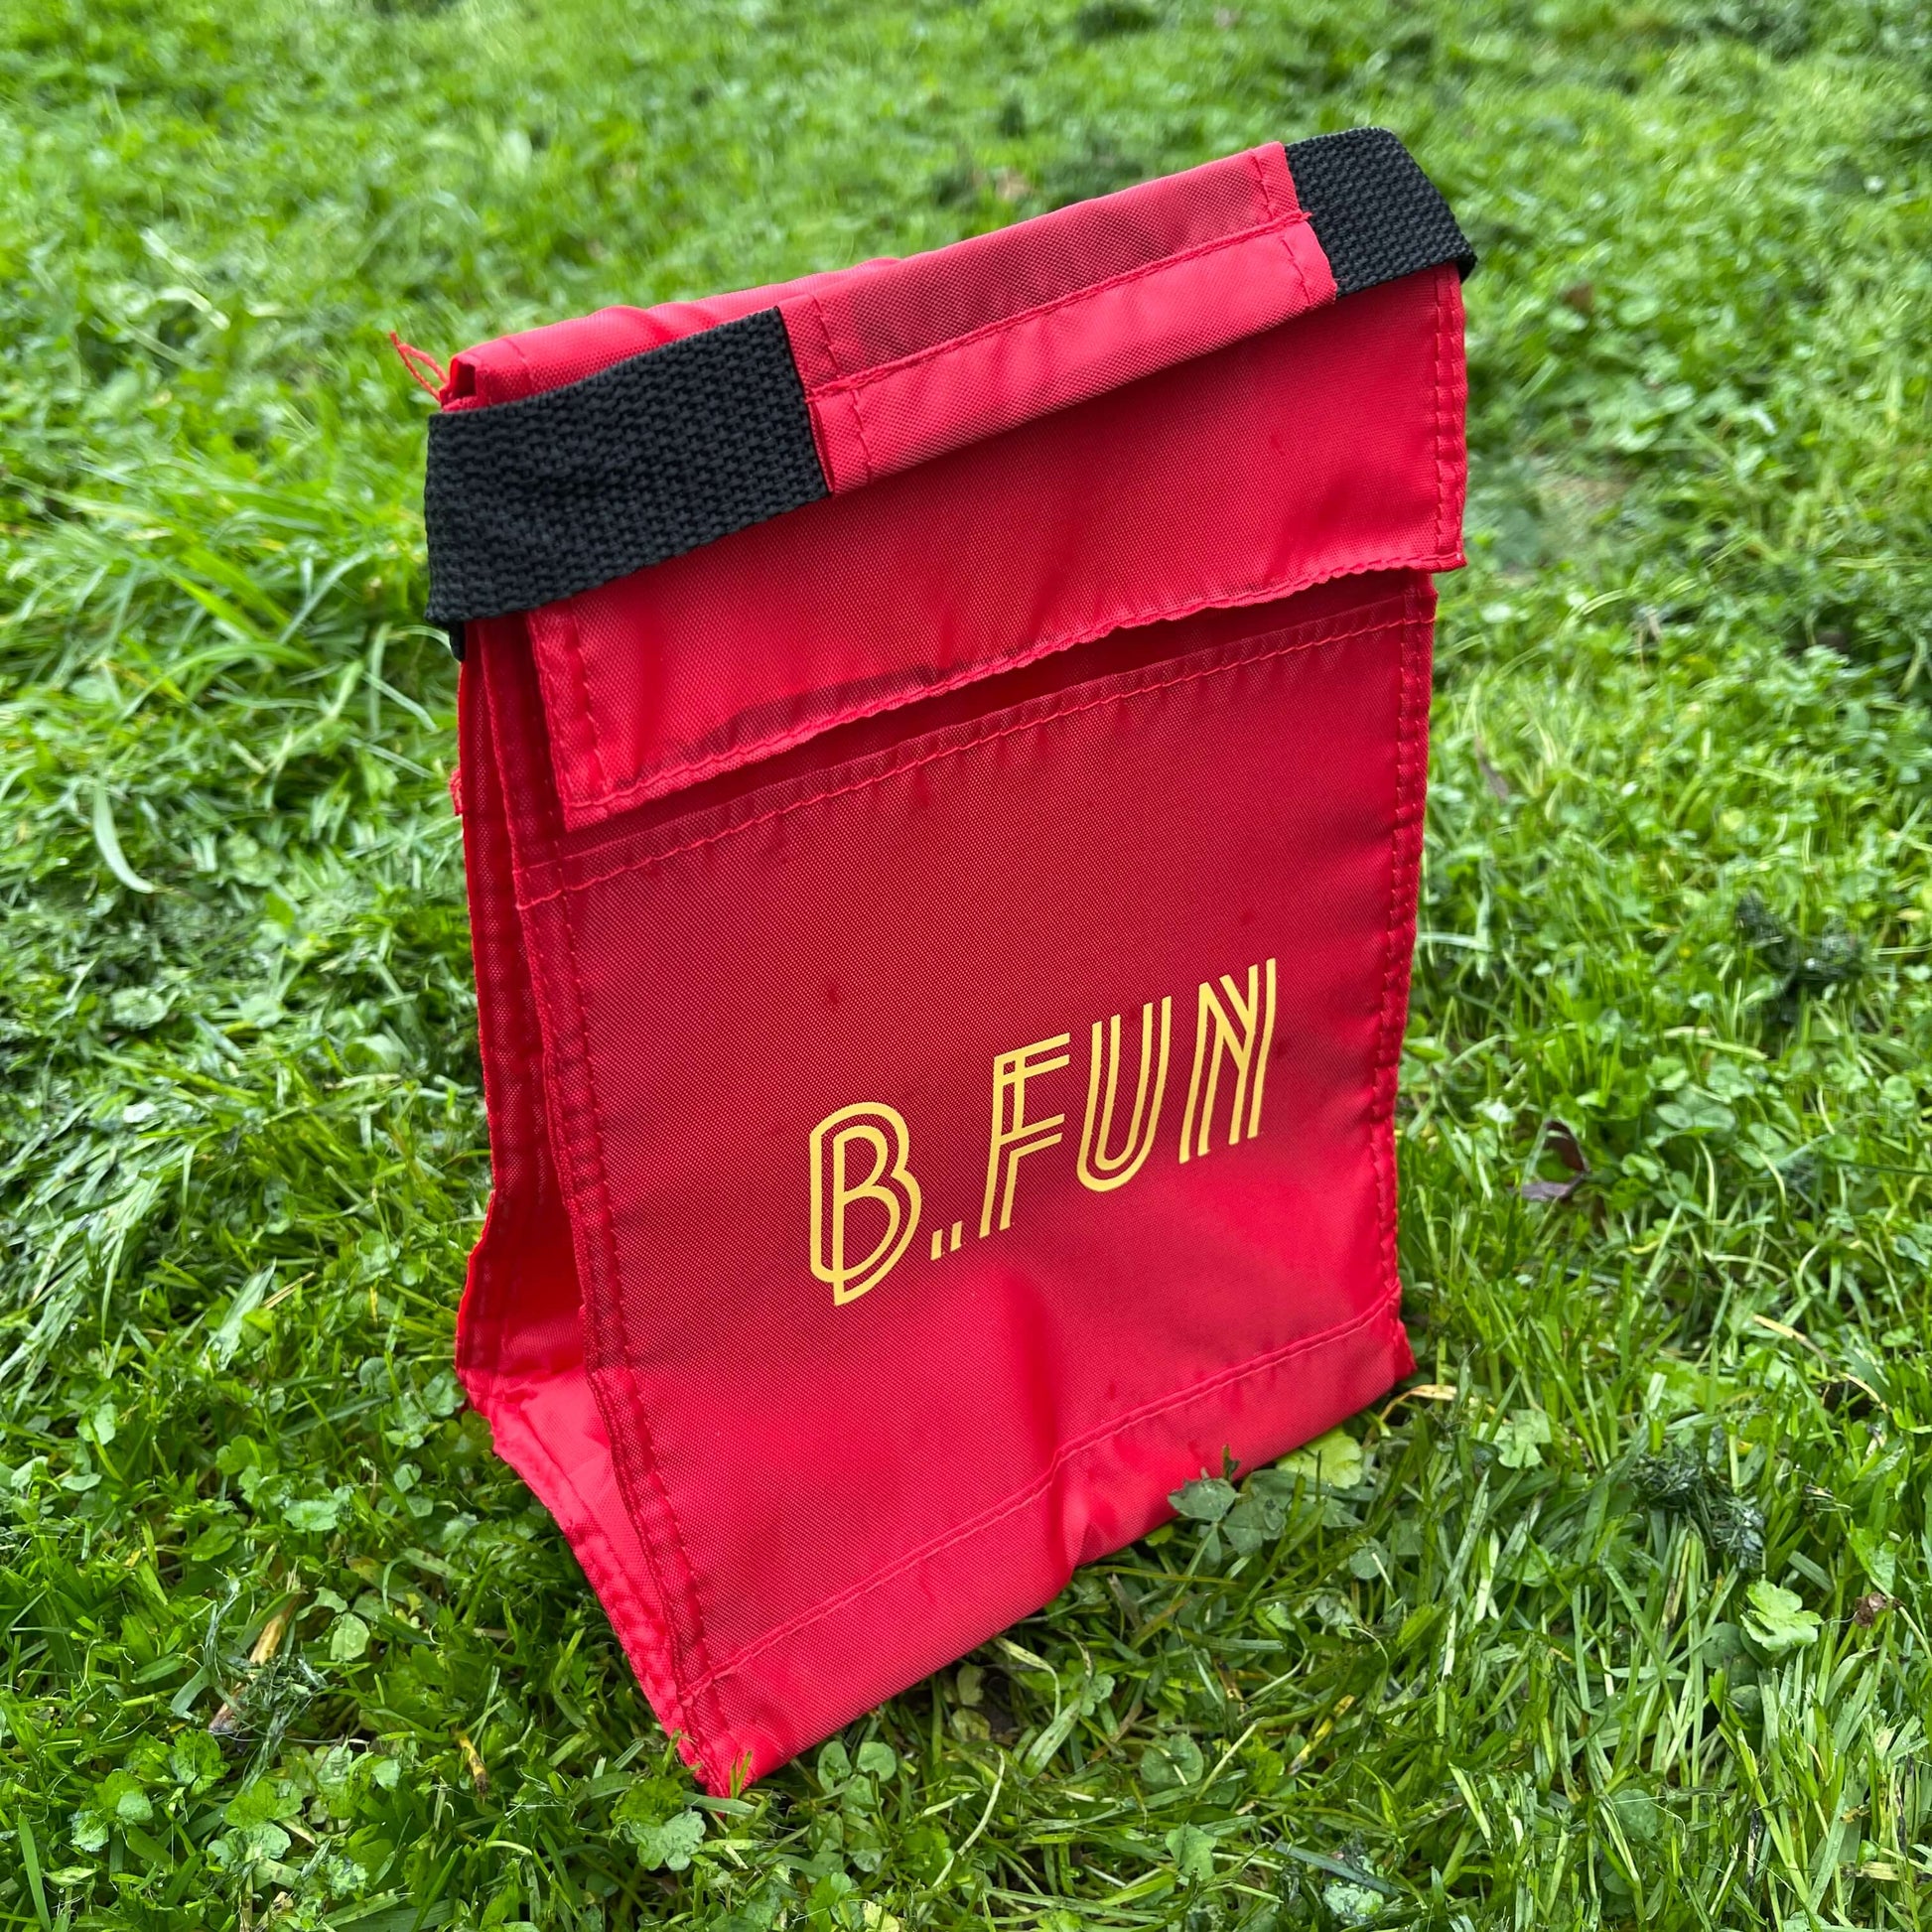 Insulated lunch carry bag in red and in a small size.